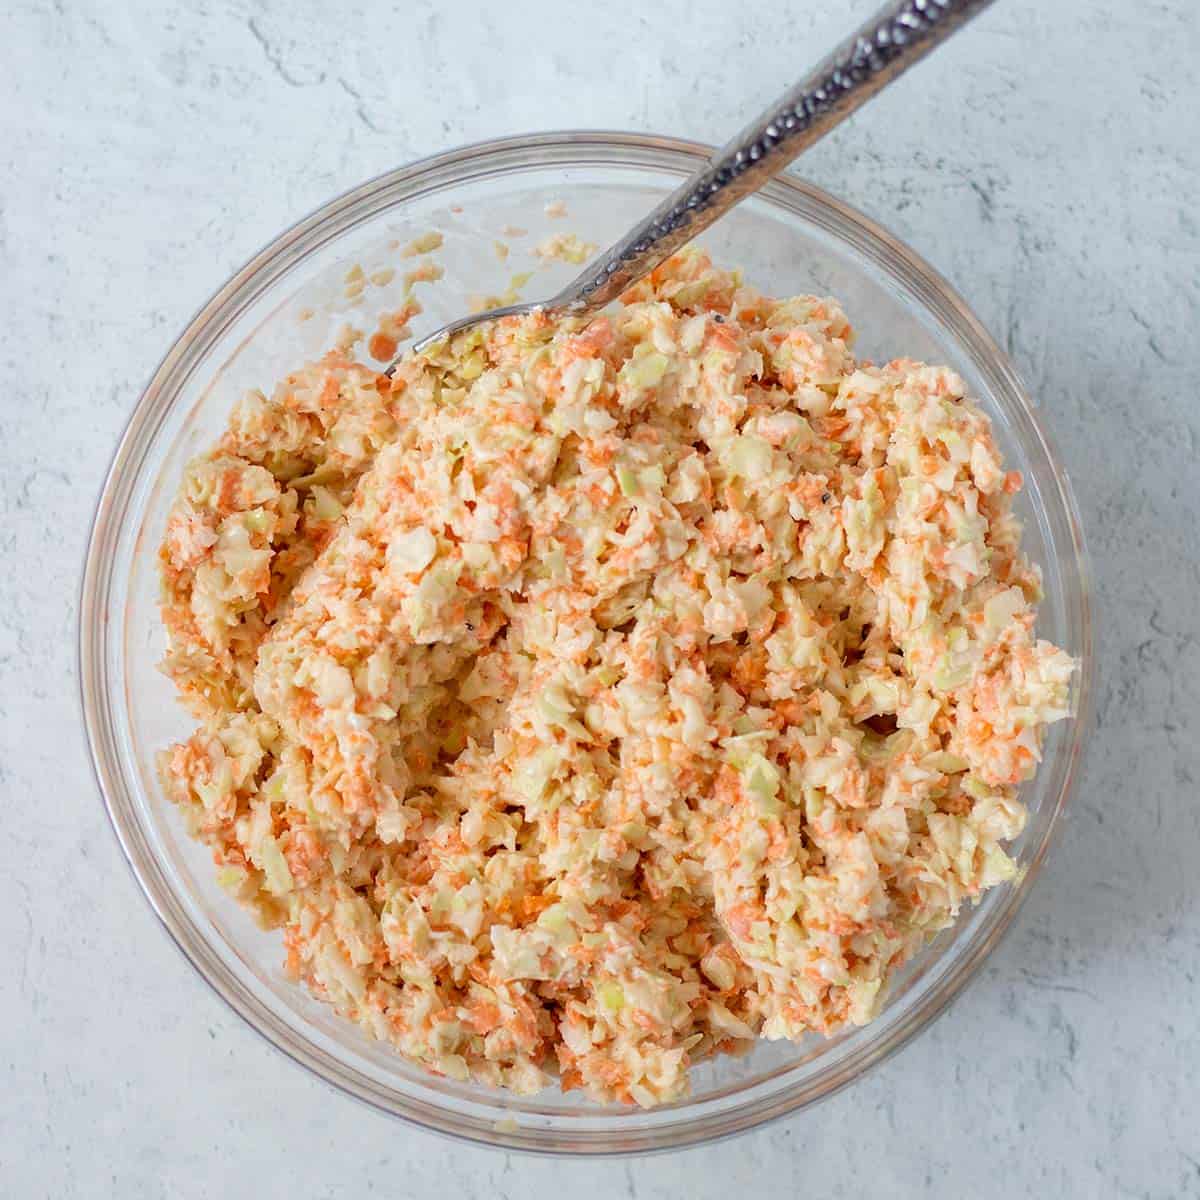 Prepared honey mustard coleslaw in a clear mixing bowl with a silver spoon.